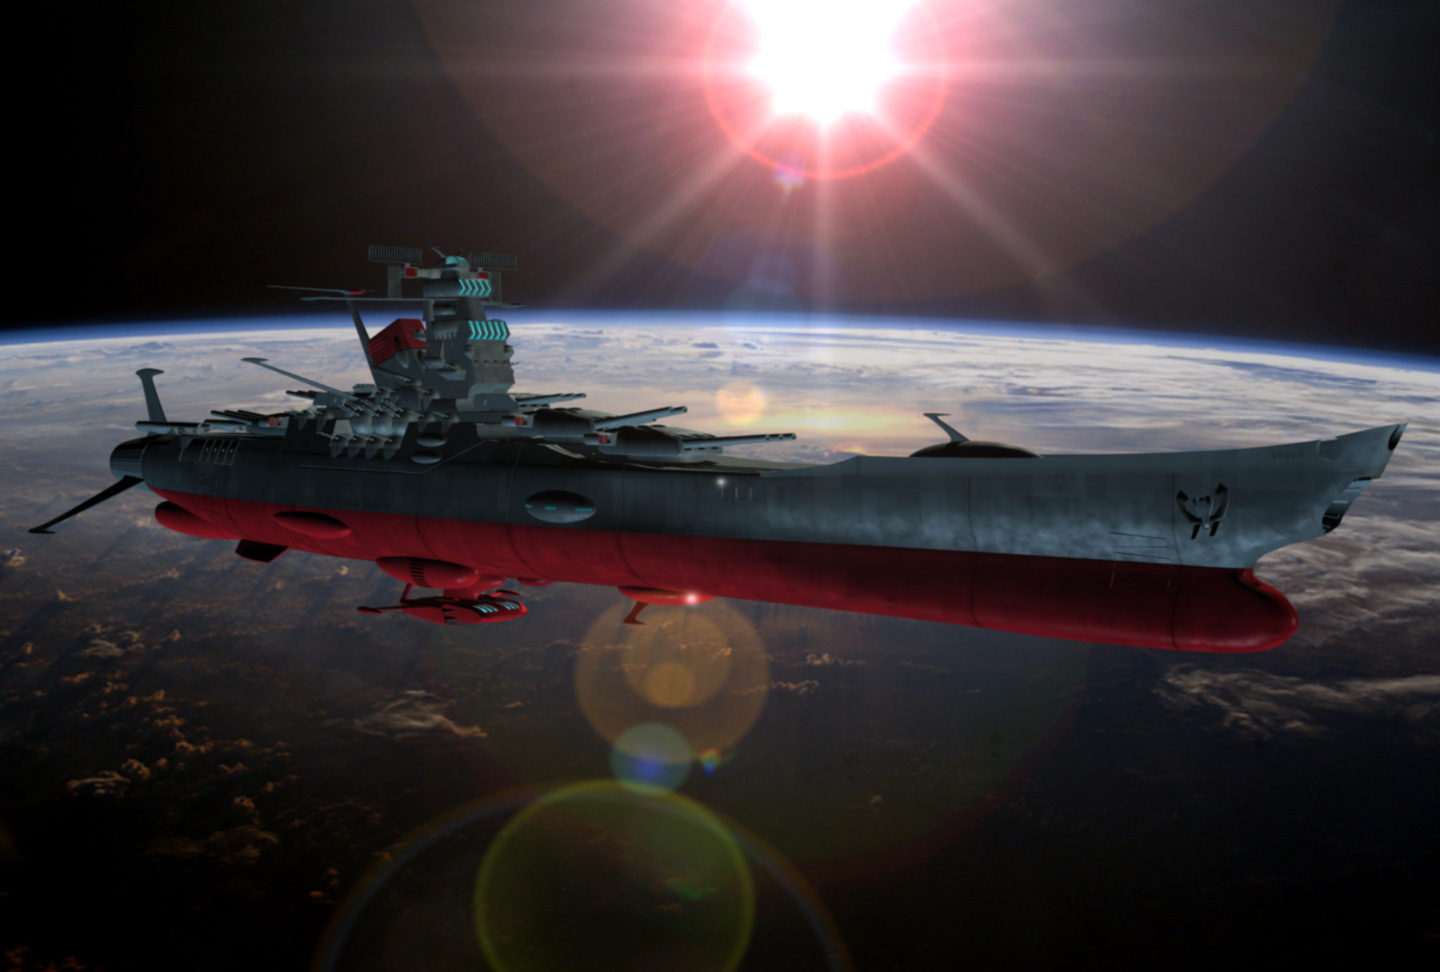 Free download yamato space battleship yamato [1440x972] for your Desktop, Mobile & Tablet. Explore Space Battleship Yamato Wallpaper. Space Battleship Yamato 2199 Wallpaper, Star Blazers Wallpaper